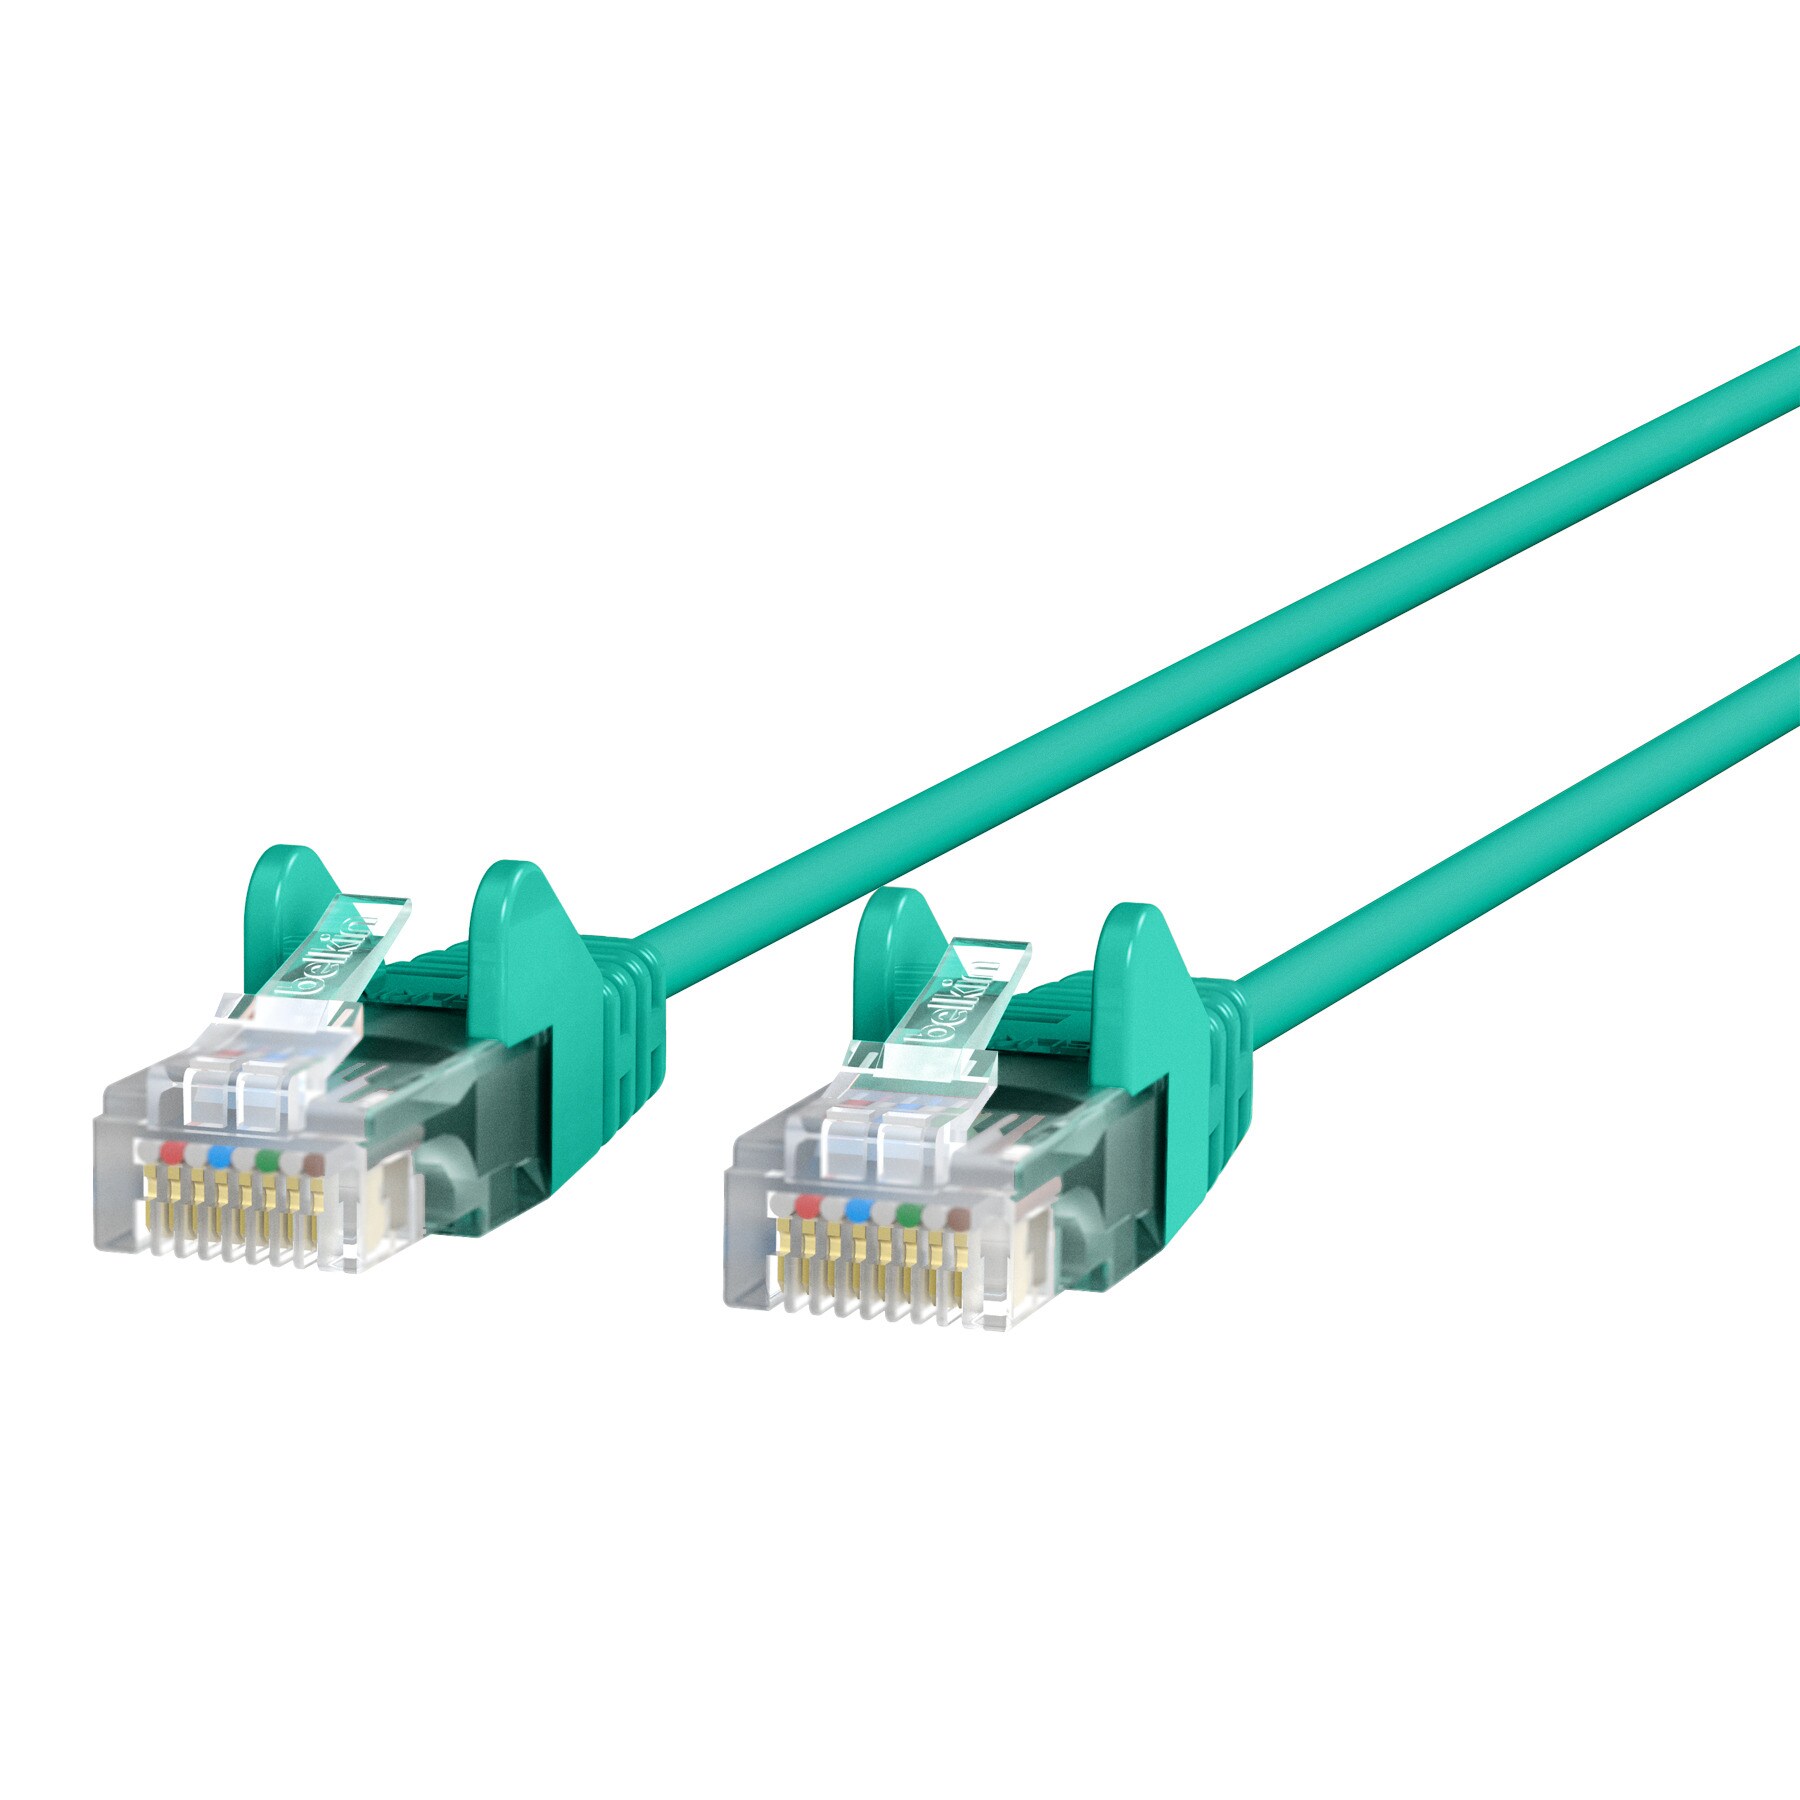 Belkin Slim - patch cable - 6 ft - green